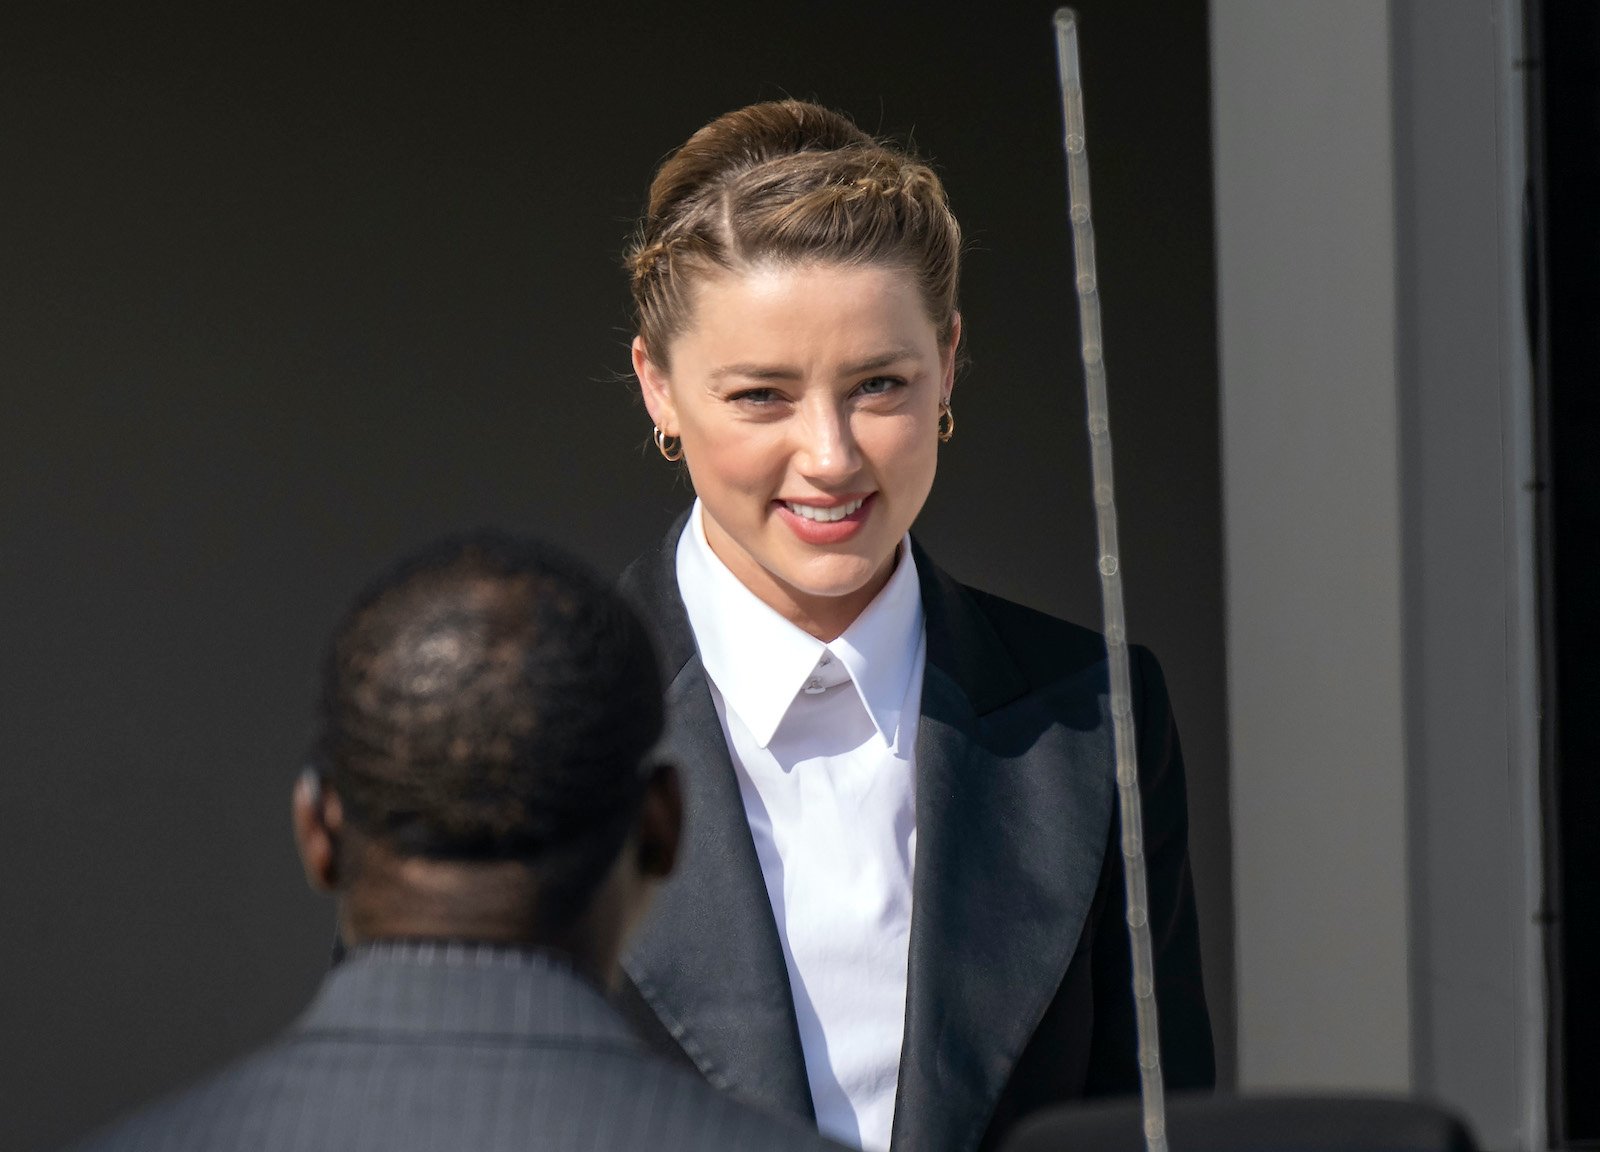 Amber Heard leaves court during the Johnny Depp vs. Amber Heard trial 